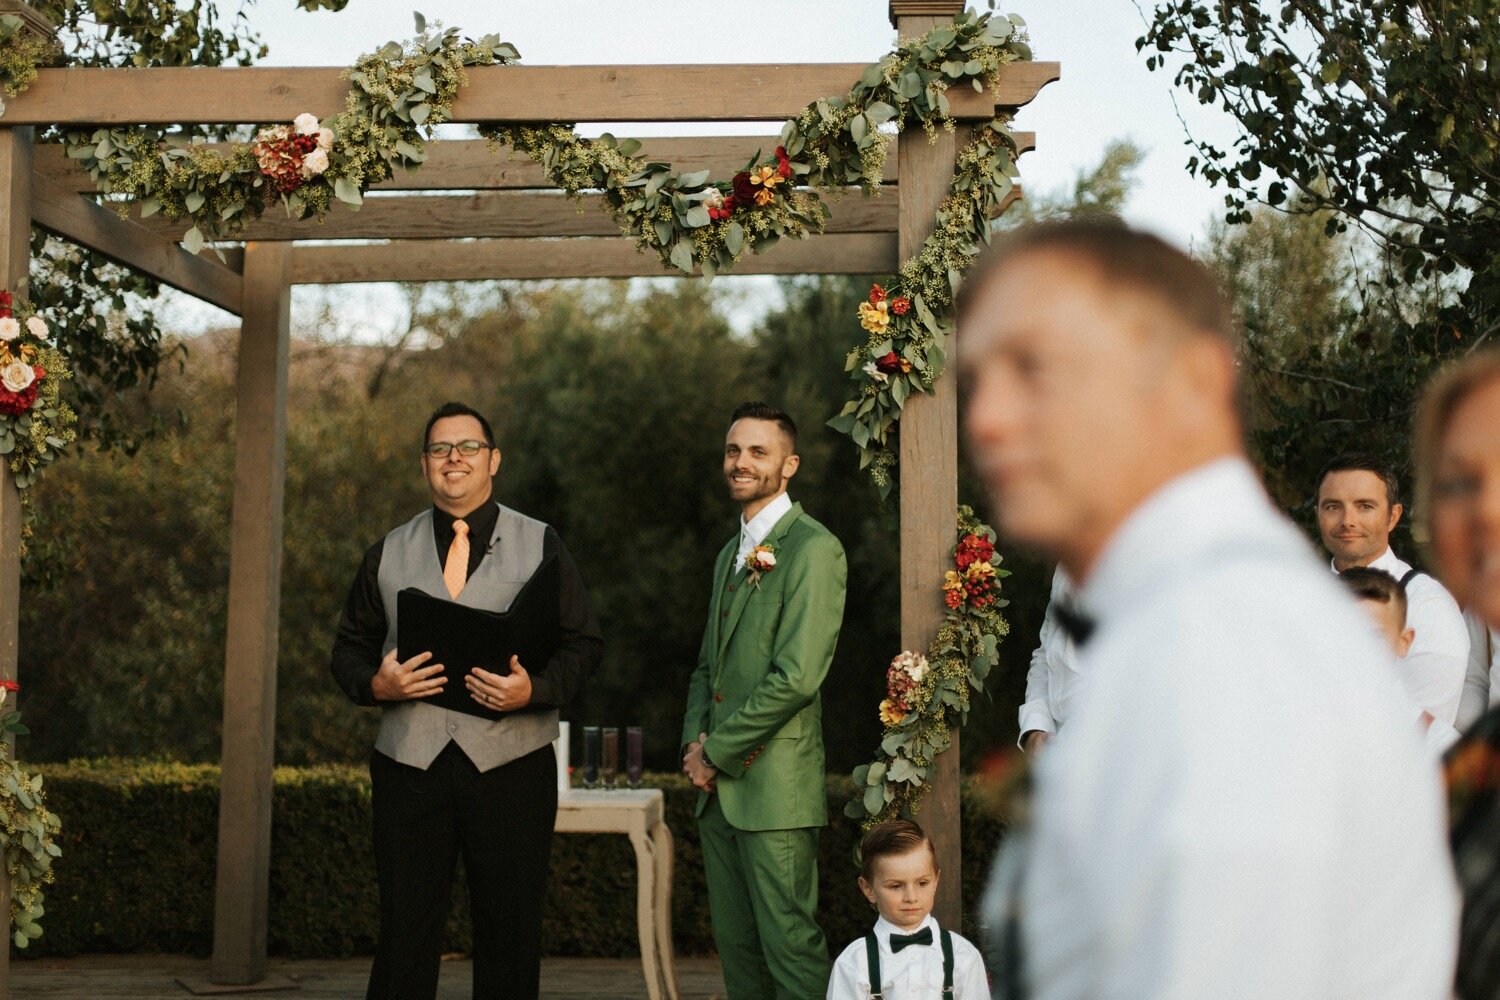  groom, dressed in a green suit, smiles as he sees his bride for the first time walking down the aisle at their dana powers house wedding, captured by slo wedding photographers poppy and vine 